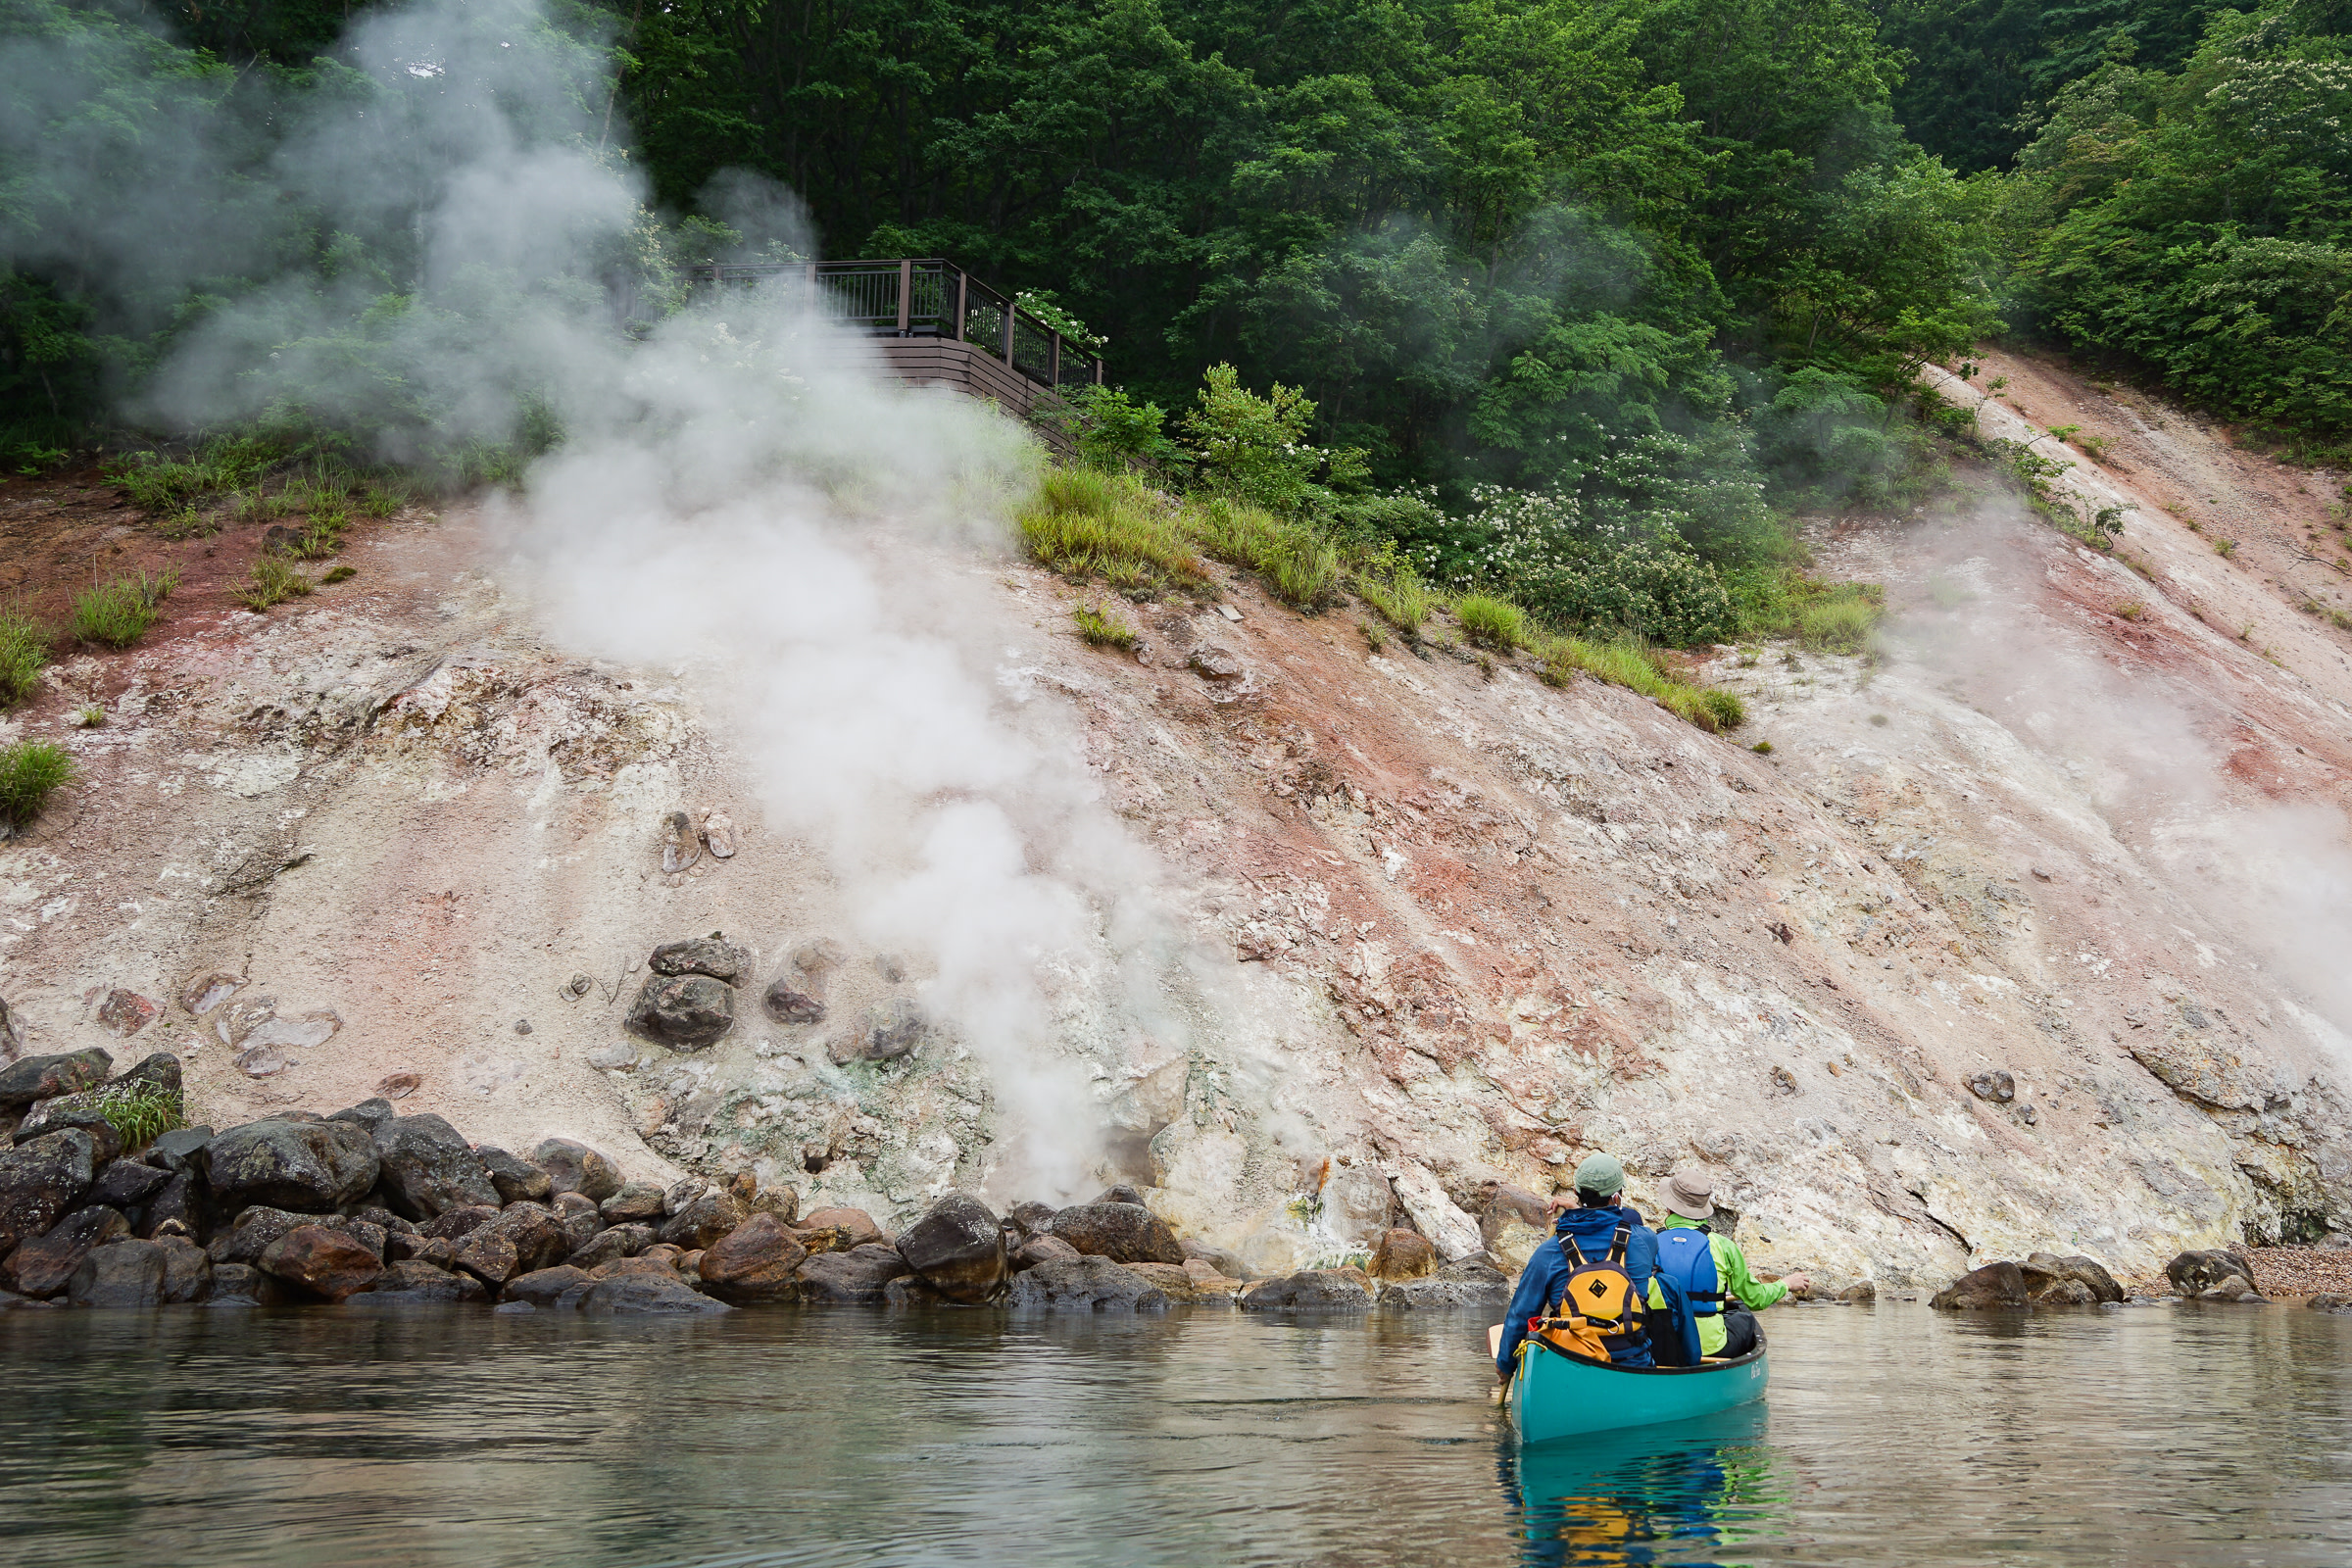 Two canoers approach a steaming hot spring vent on the shore of Lake Kussharo. The vent sits at the bottom of a barren and rugged cliff.